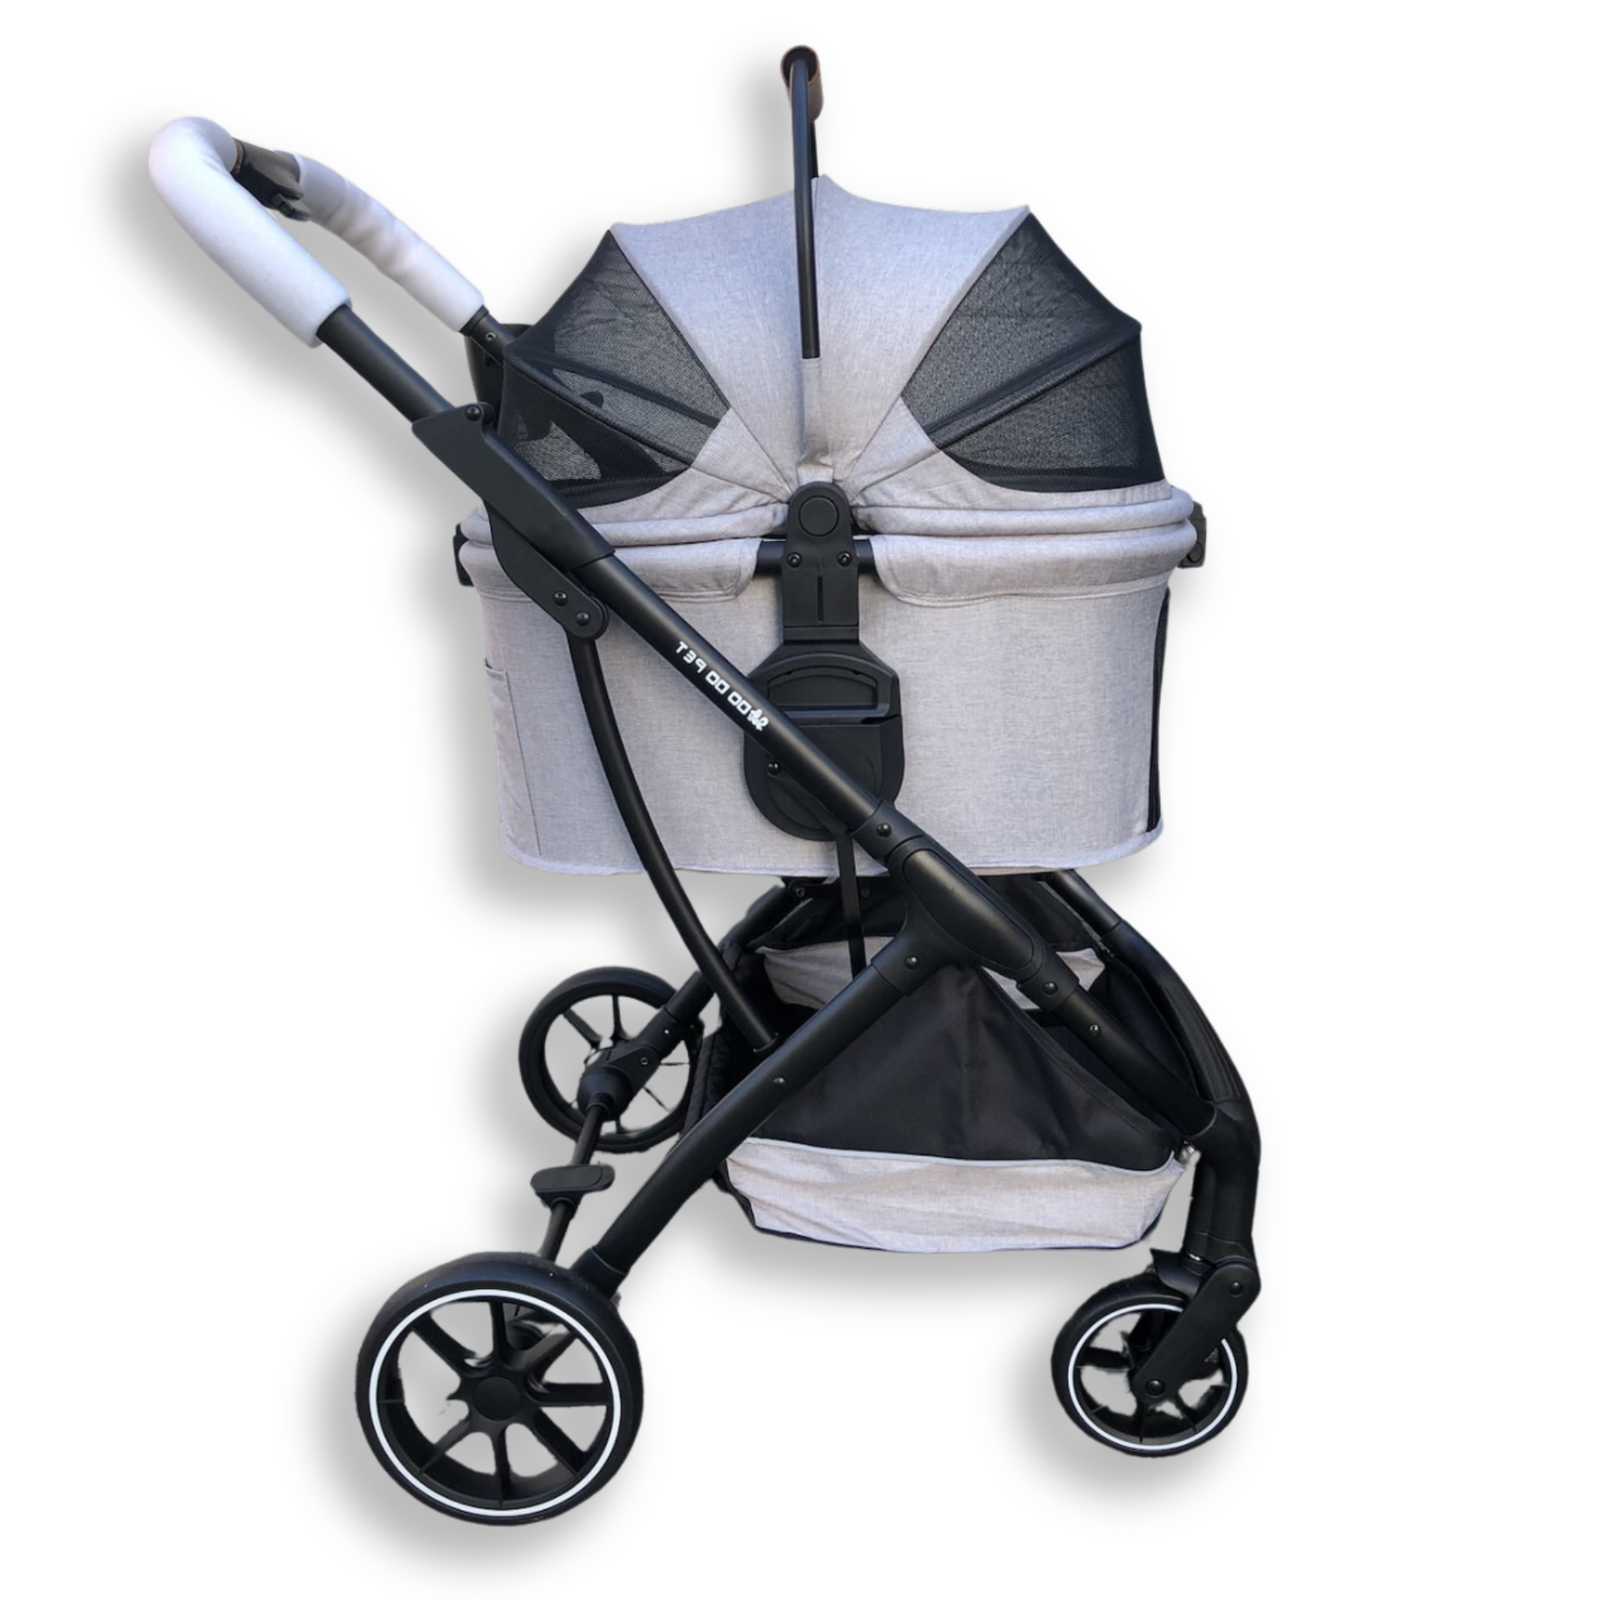 Gray pawbella pet stroller product photo with basket lid closed